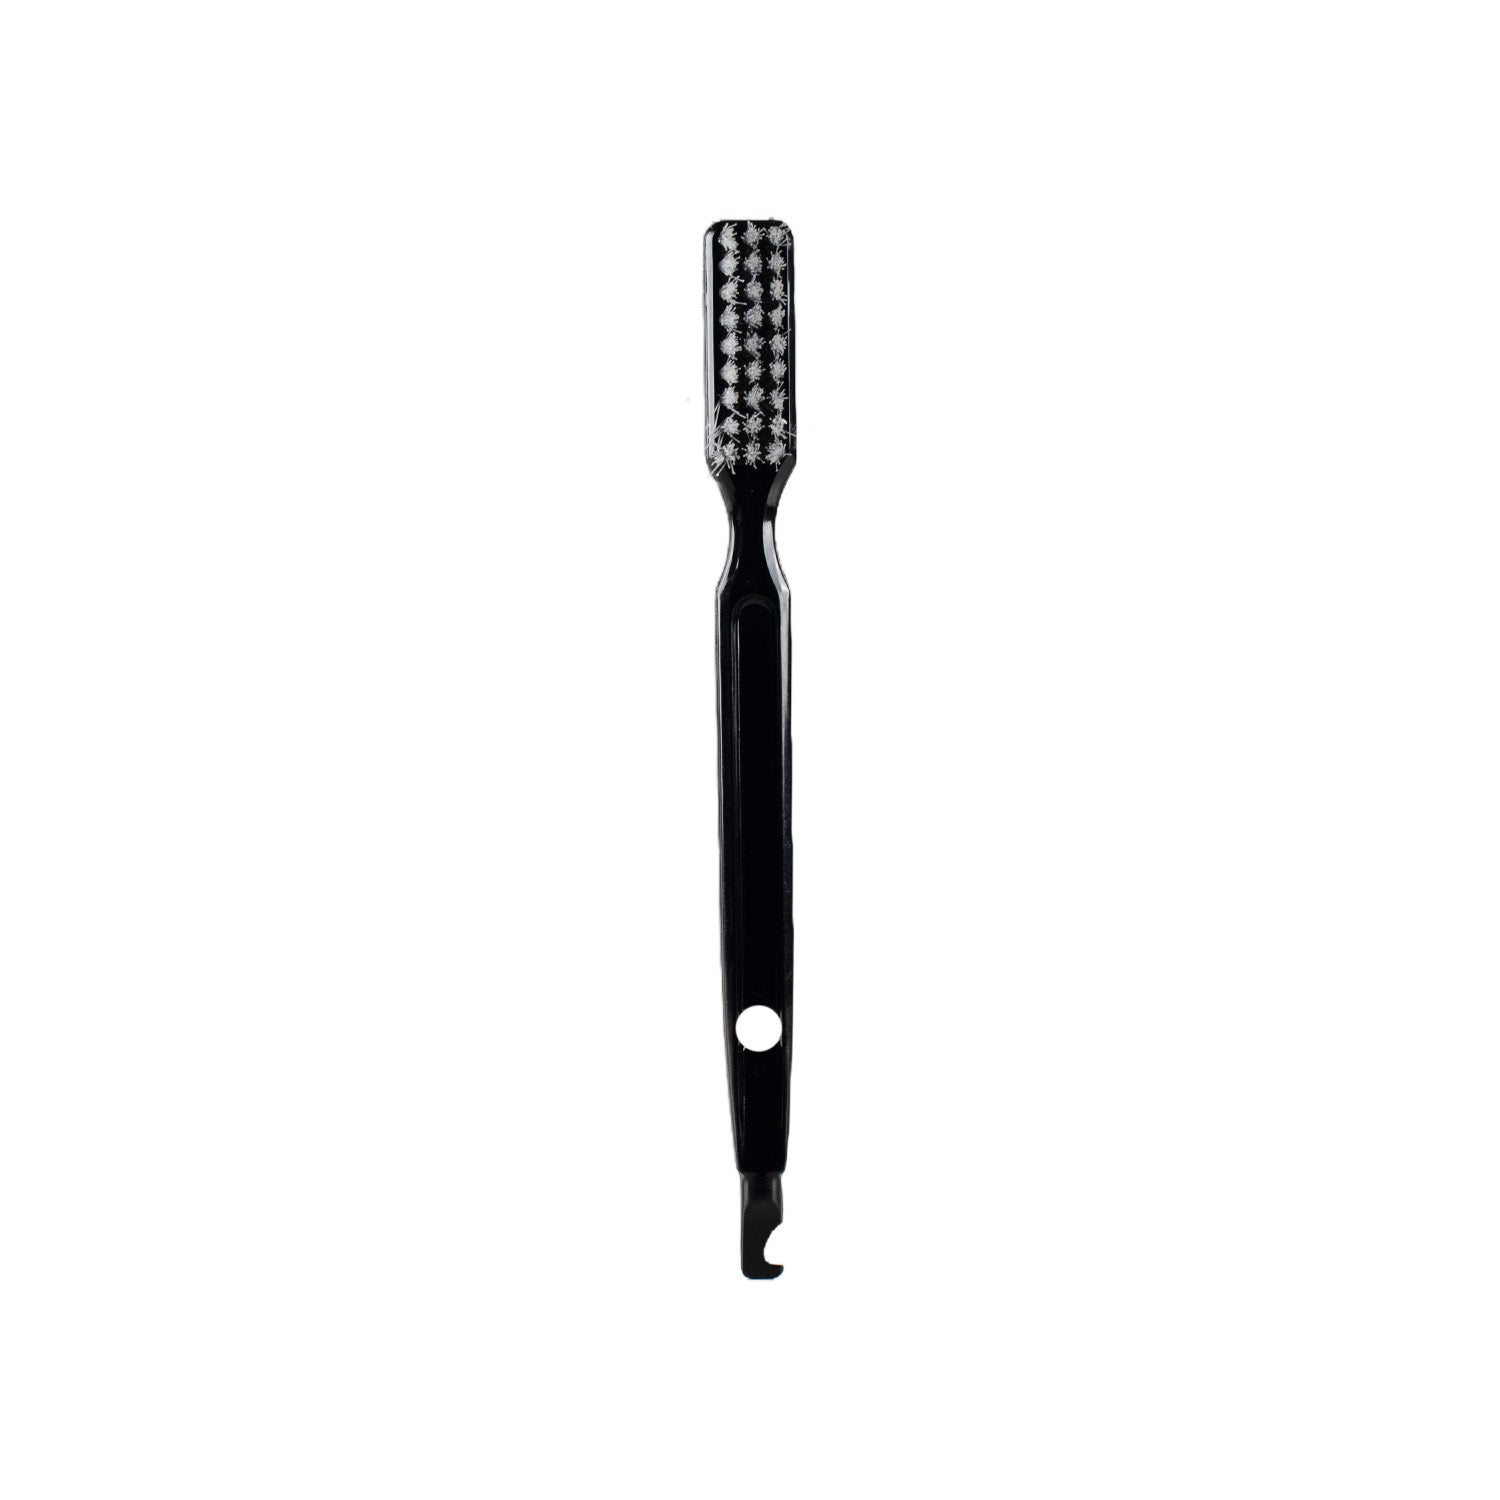 Nutri-Max Cold Press Juicer Cleaning Brush